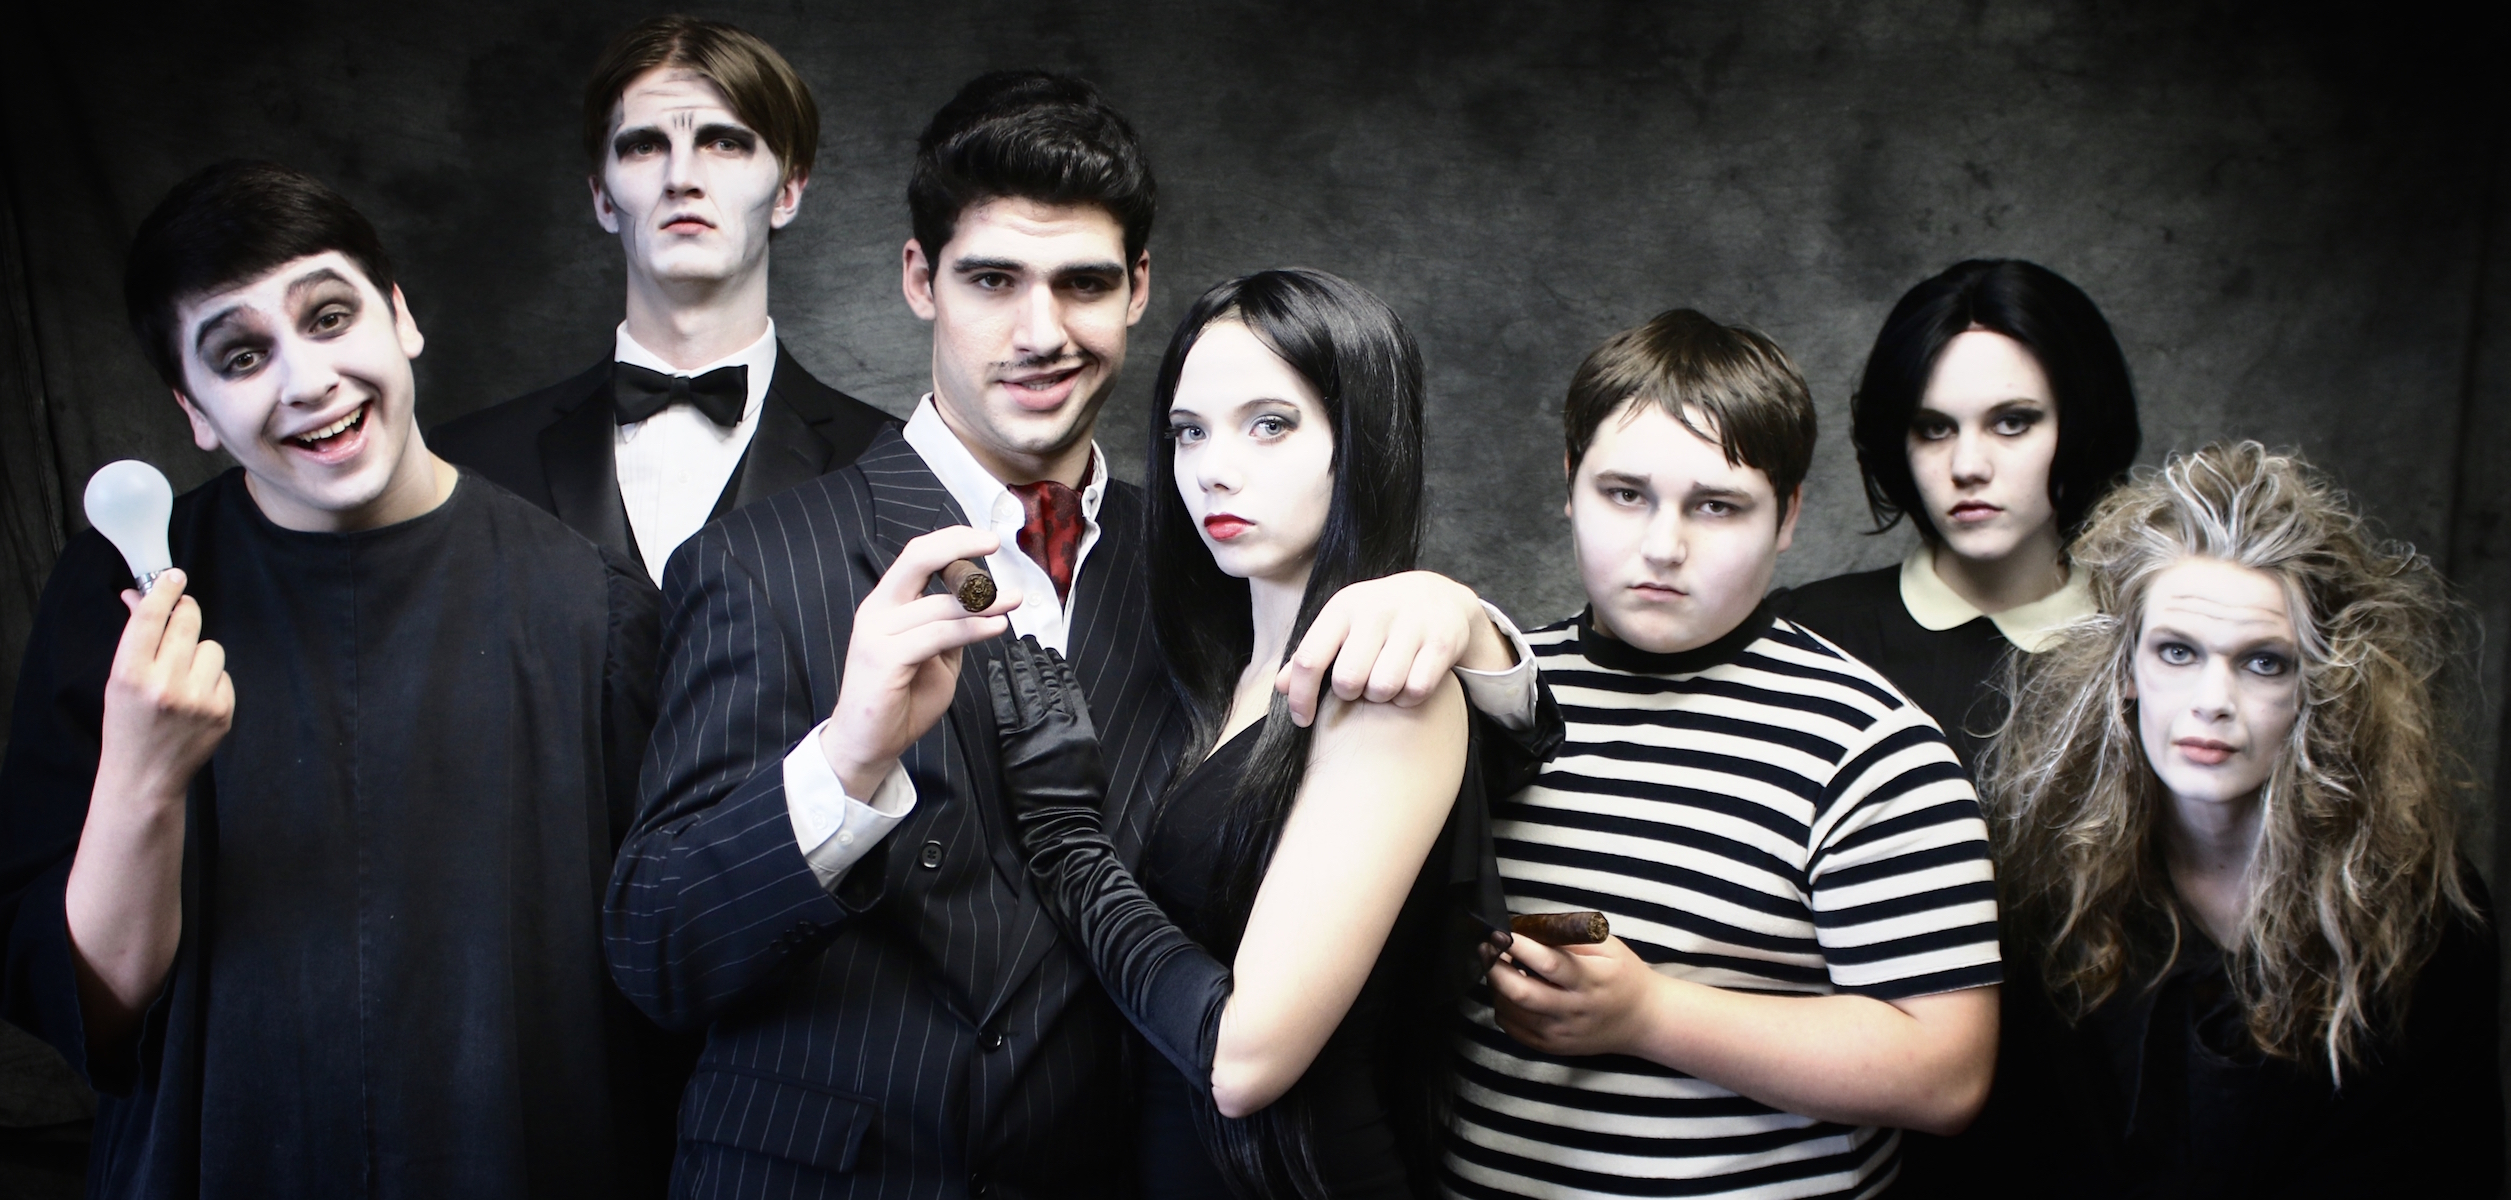 The Addams Family #7